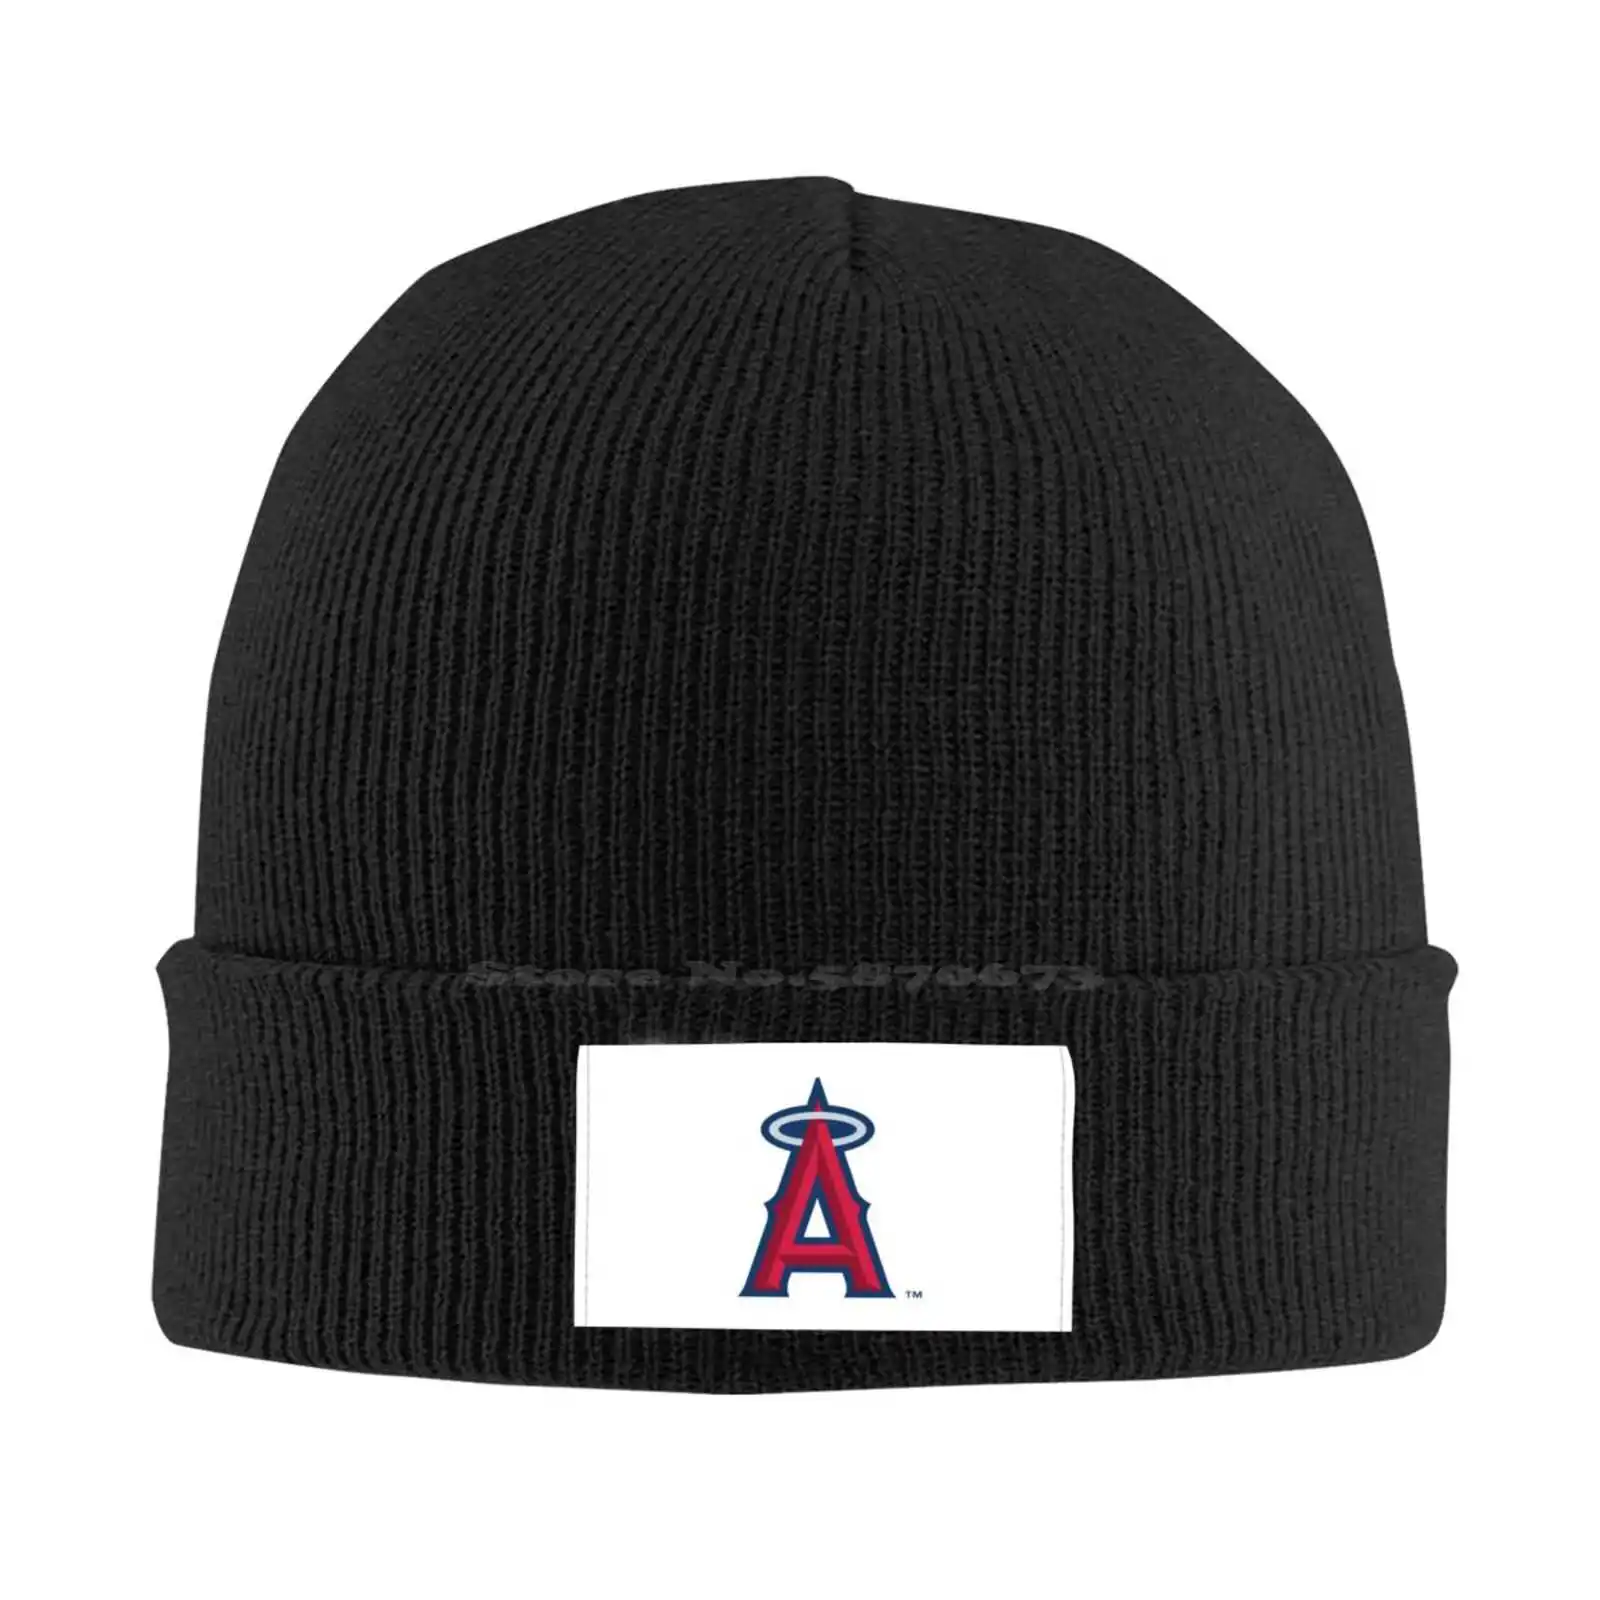 

Los Angeles Angels of Anaheim Logo Fashion cap quality Baseball cap Knitted hat